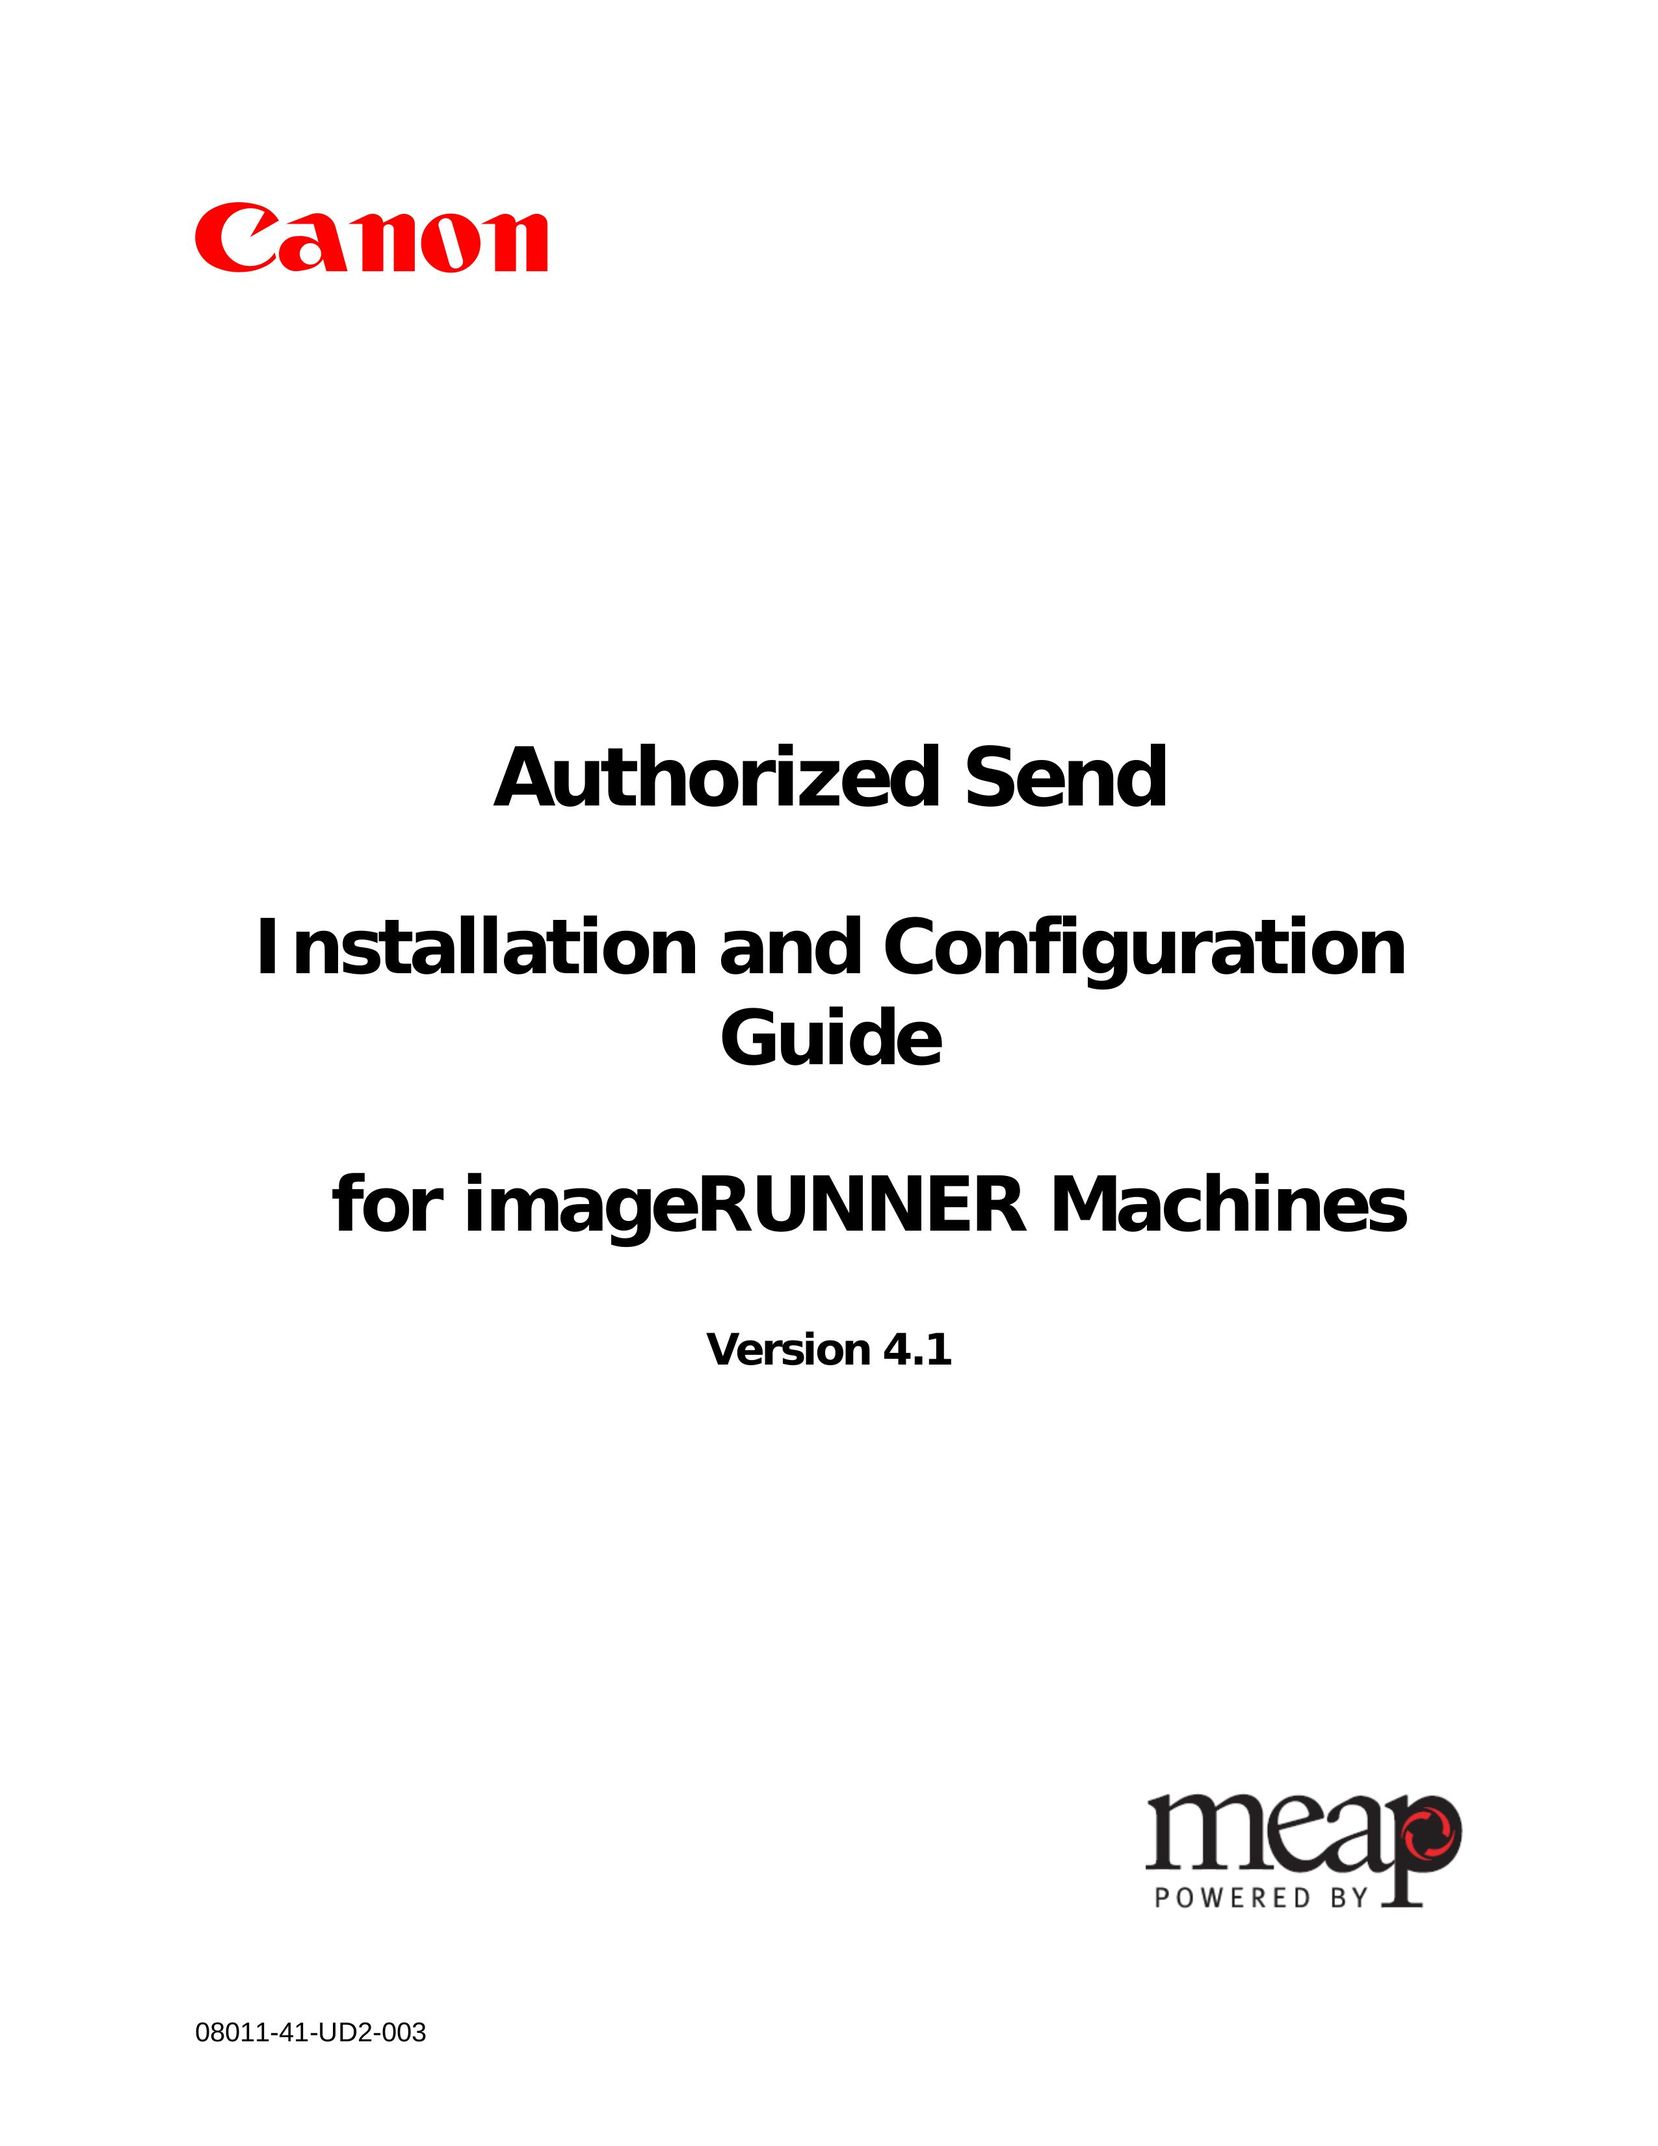 Canon 08011-41-UD2-003 All in One Printer User Manual